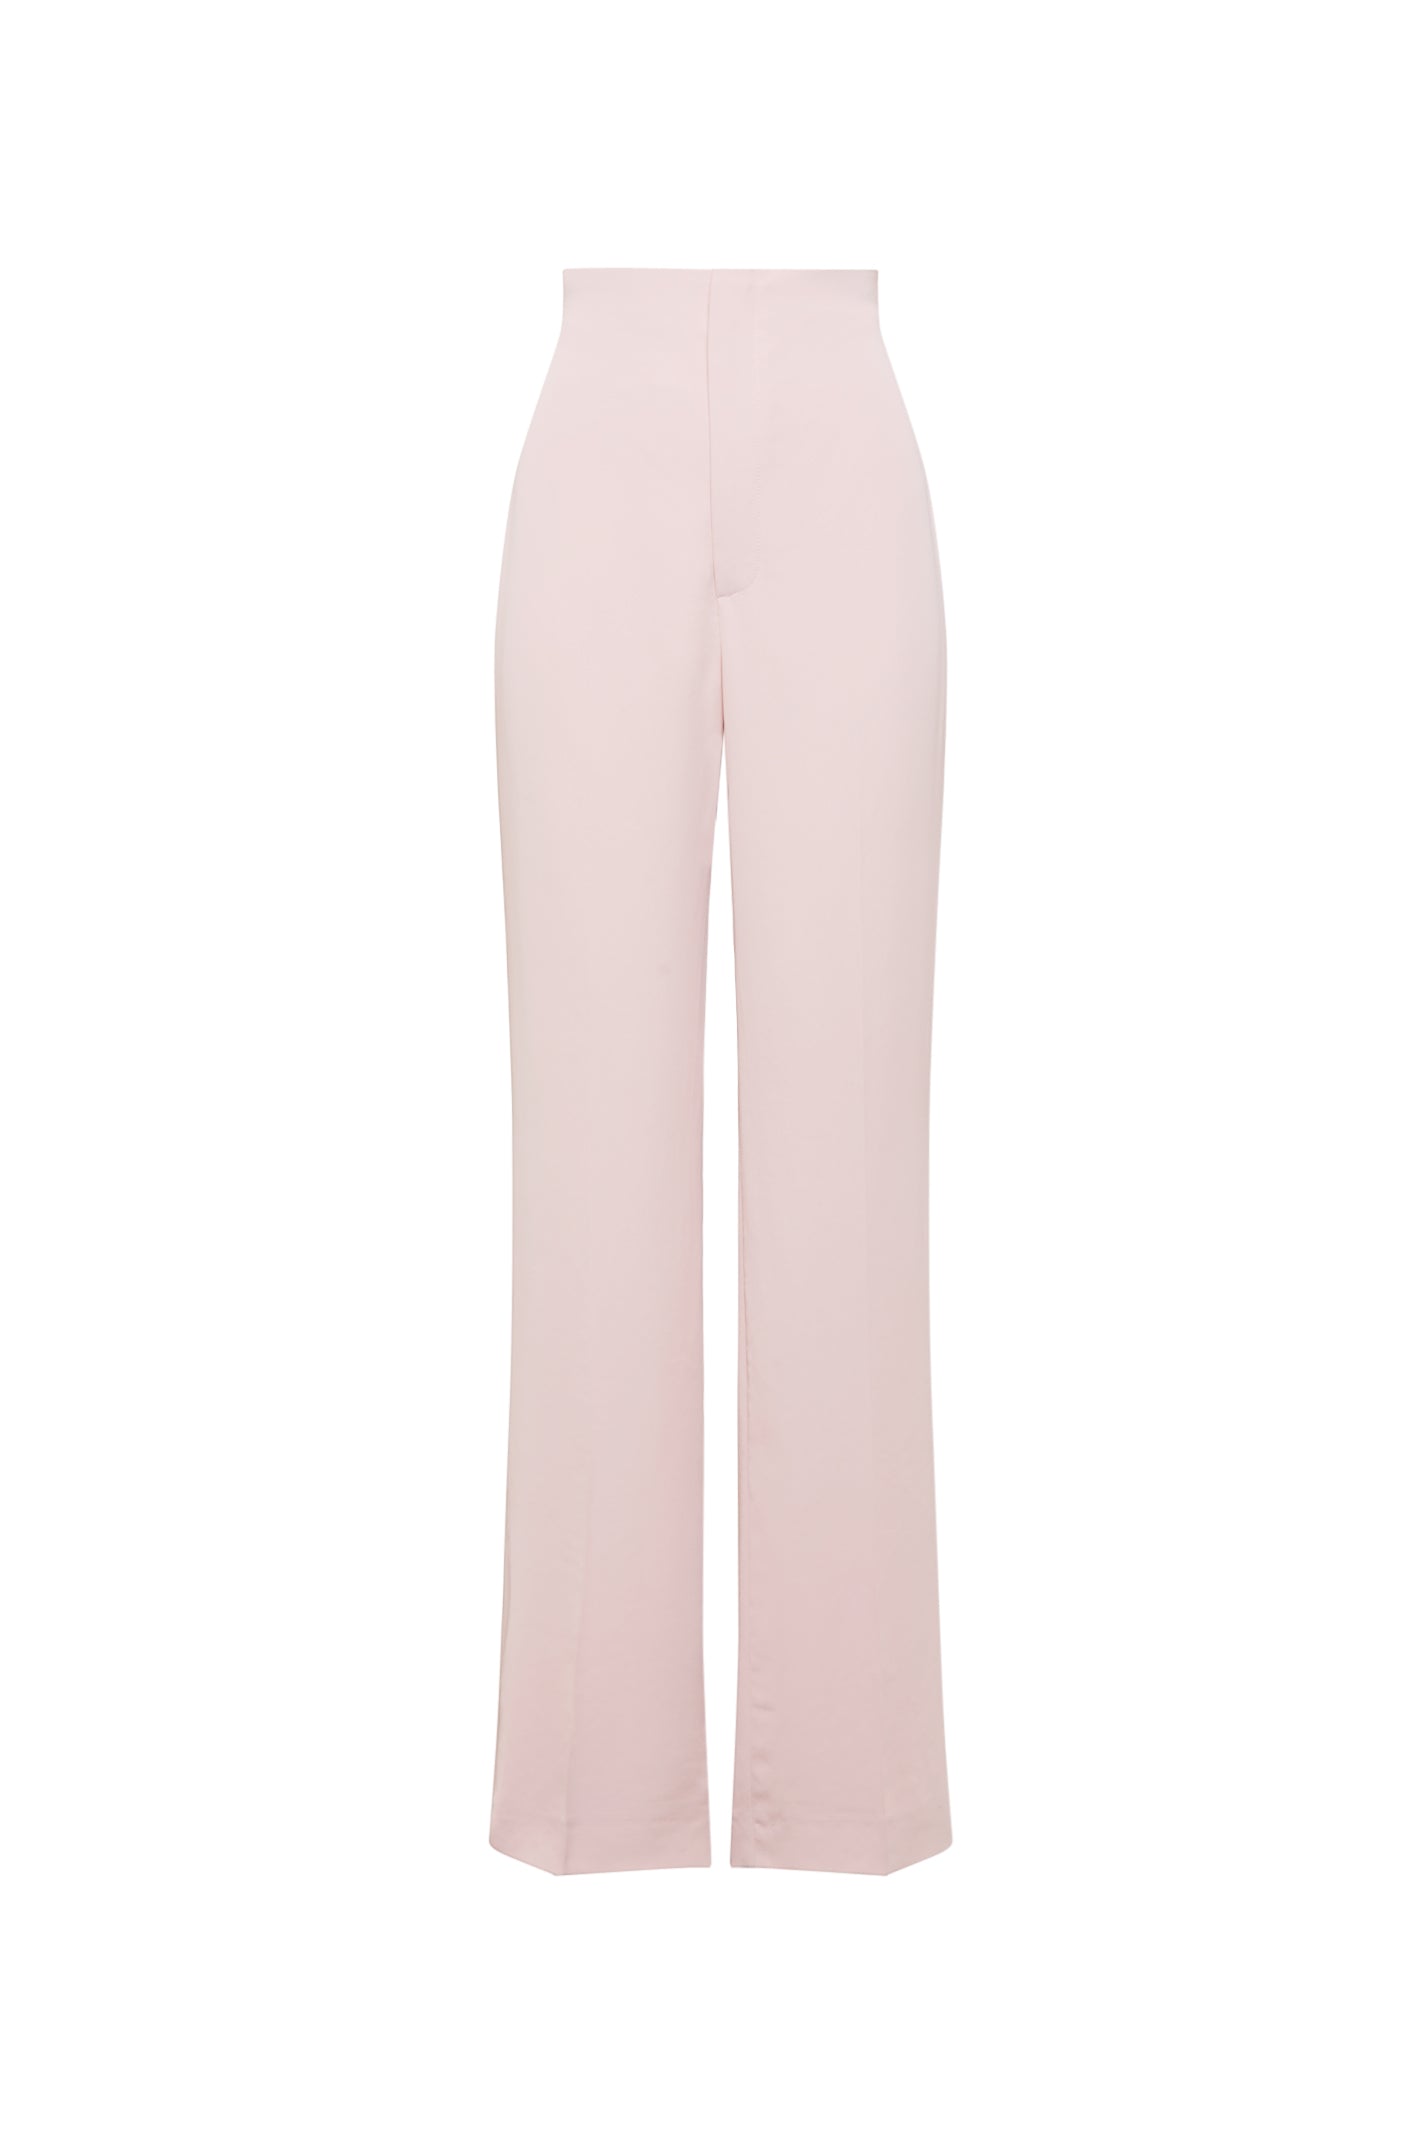 DRAPE TAILORED TROUSER - PALE.PINK